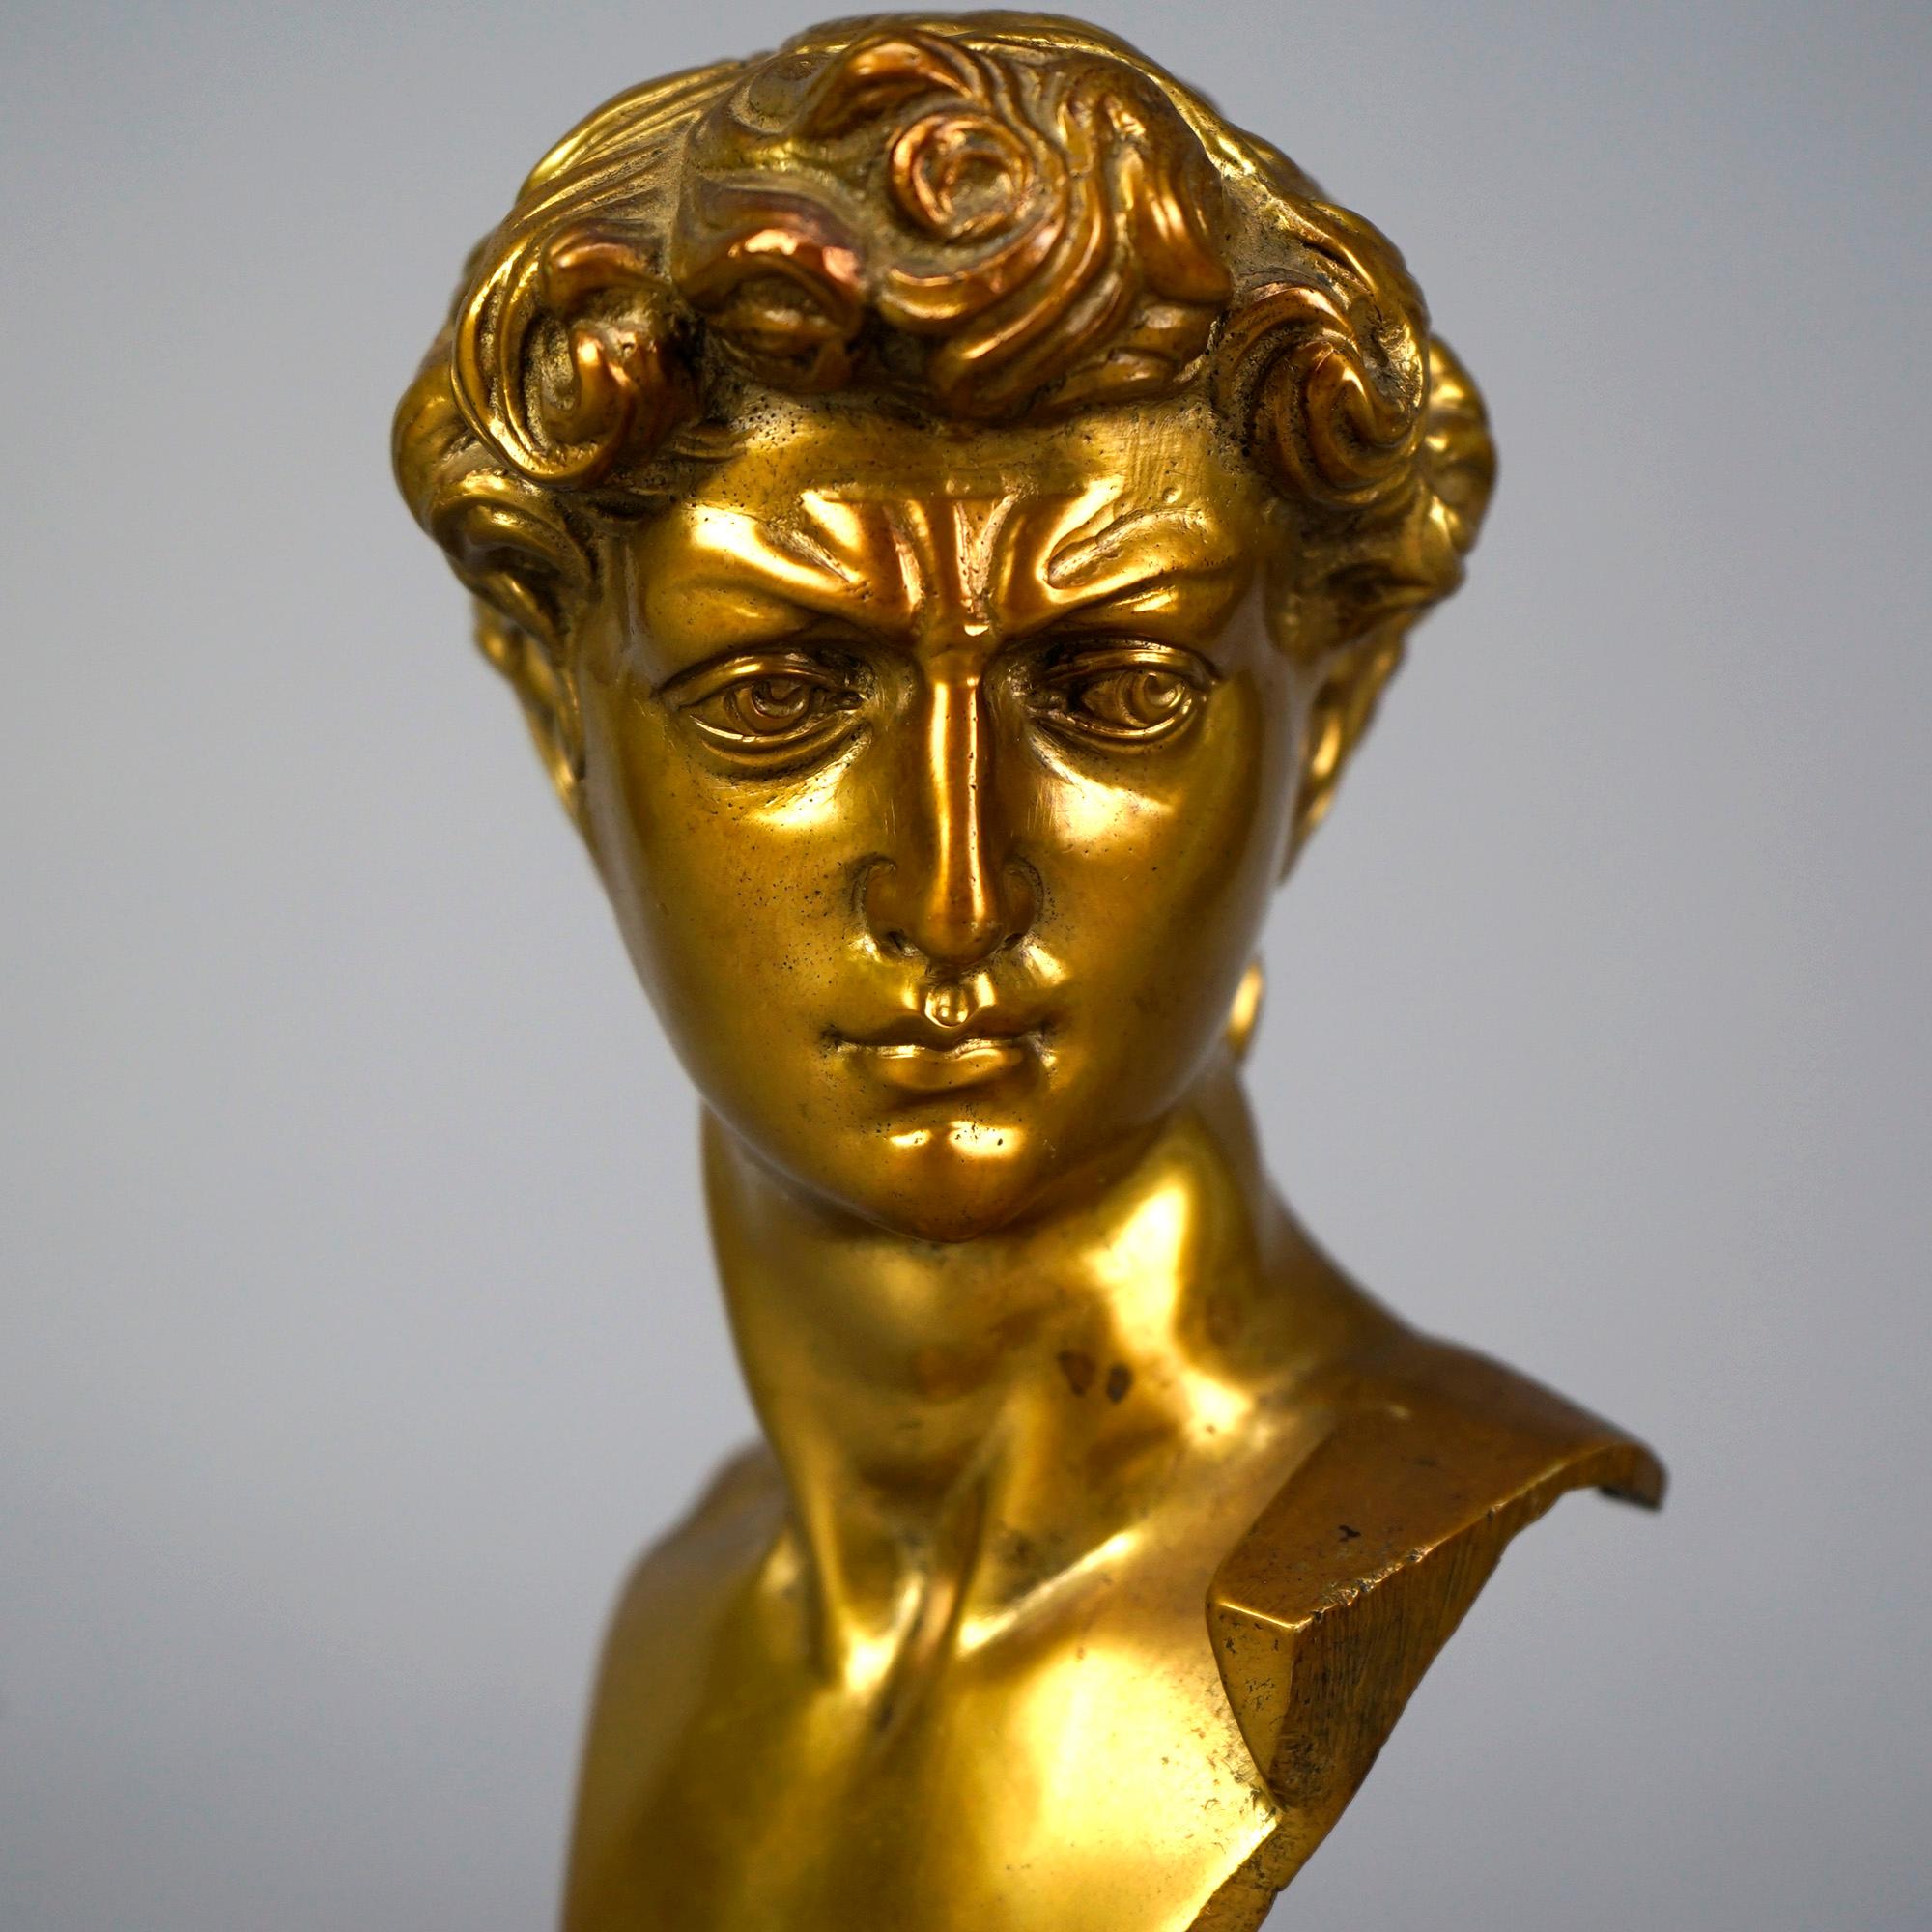 19th Century Antique Neoclassical Gilt Bronze Bust Sculpture of a Classical Man, 19th C For Sale